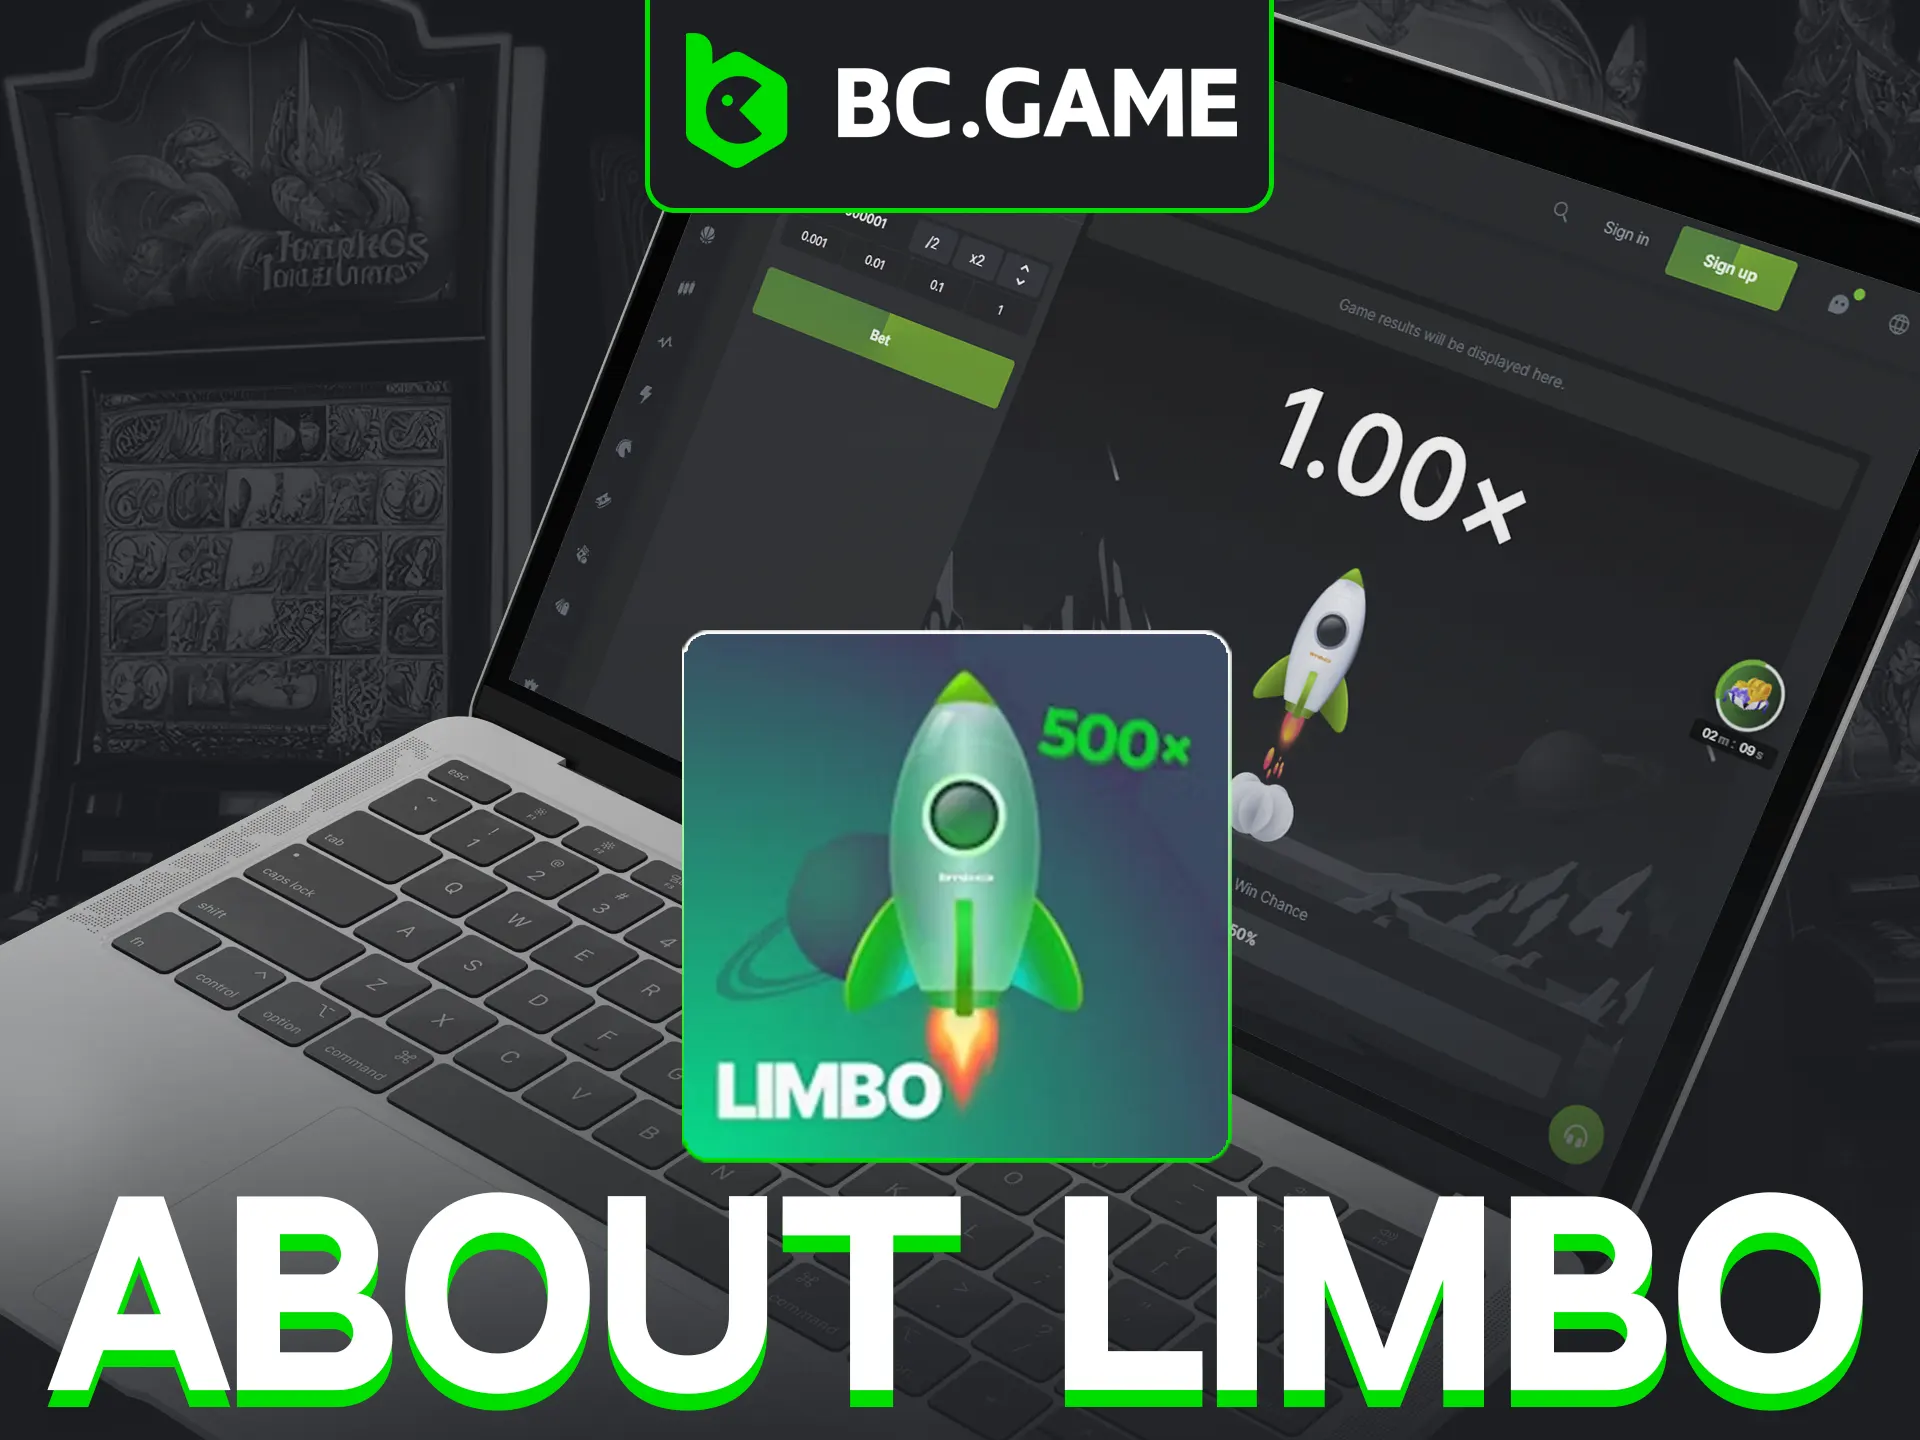 BC Game's Limbo offers fair, unpredictable betting excitement.